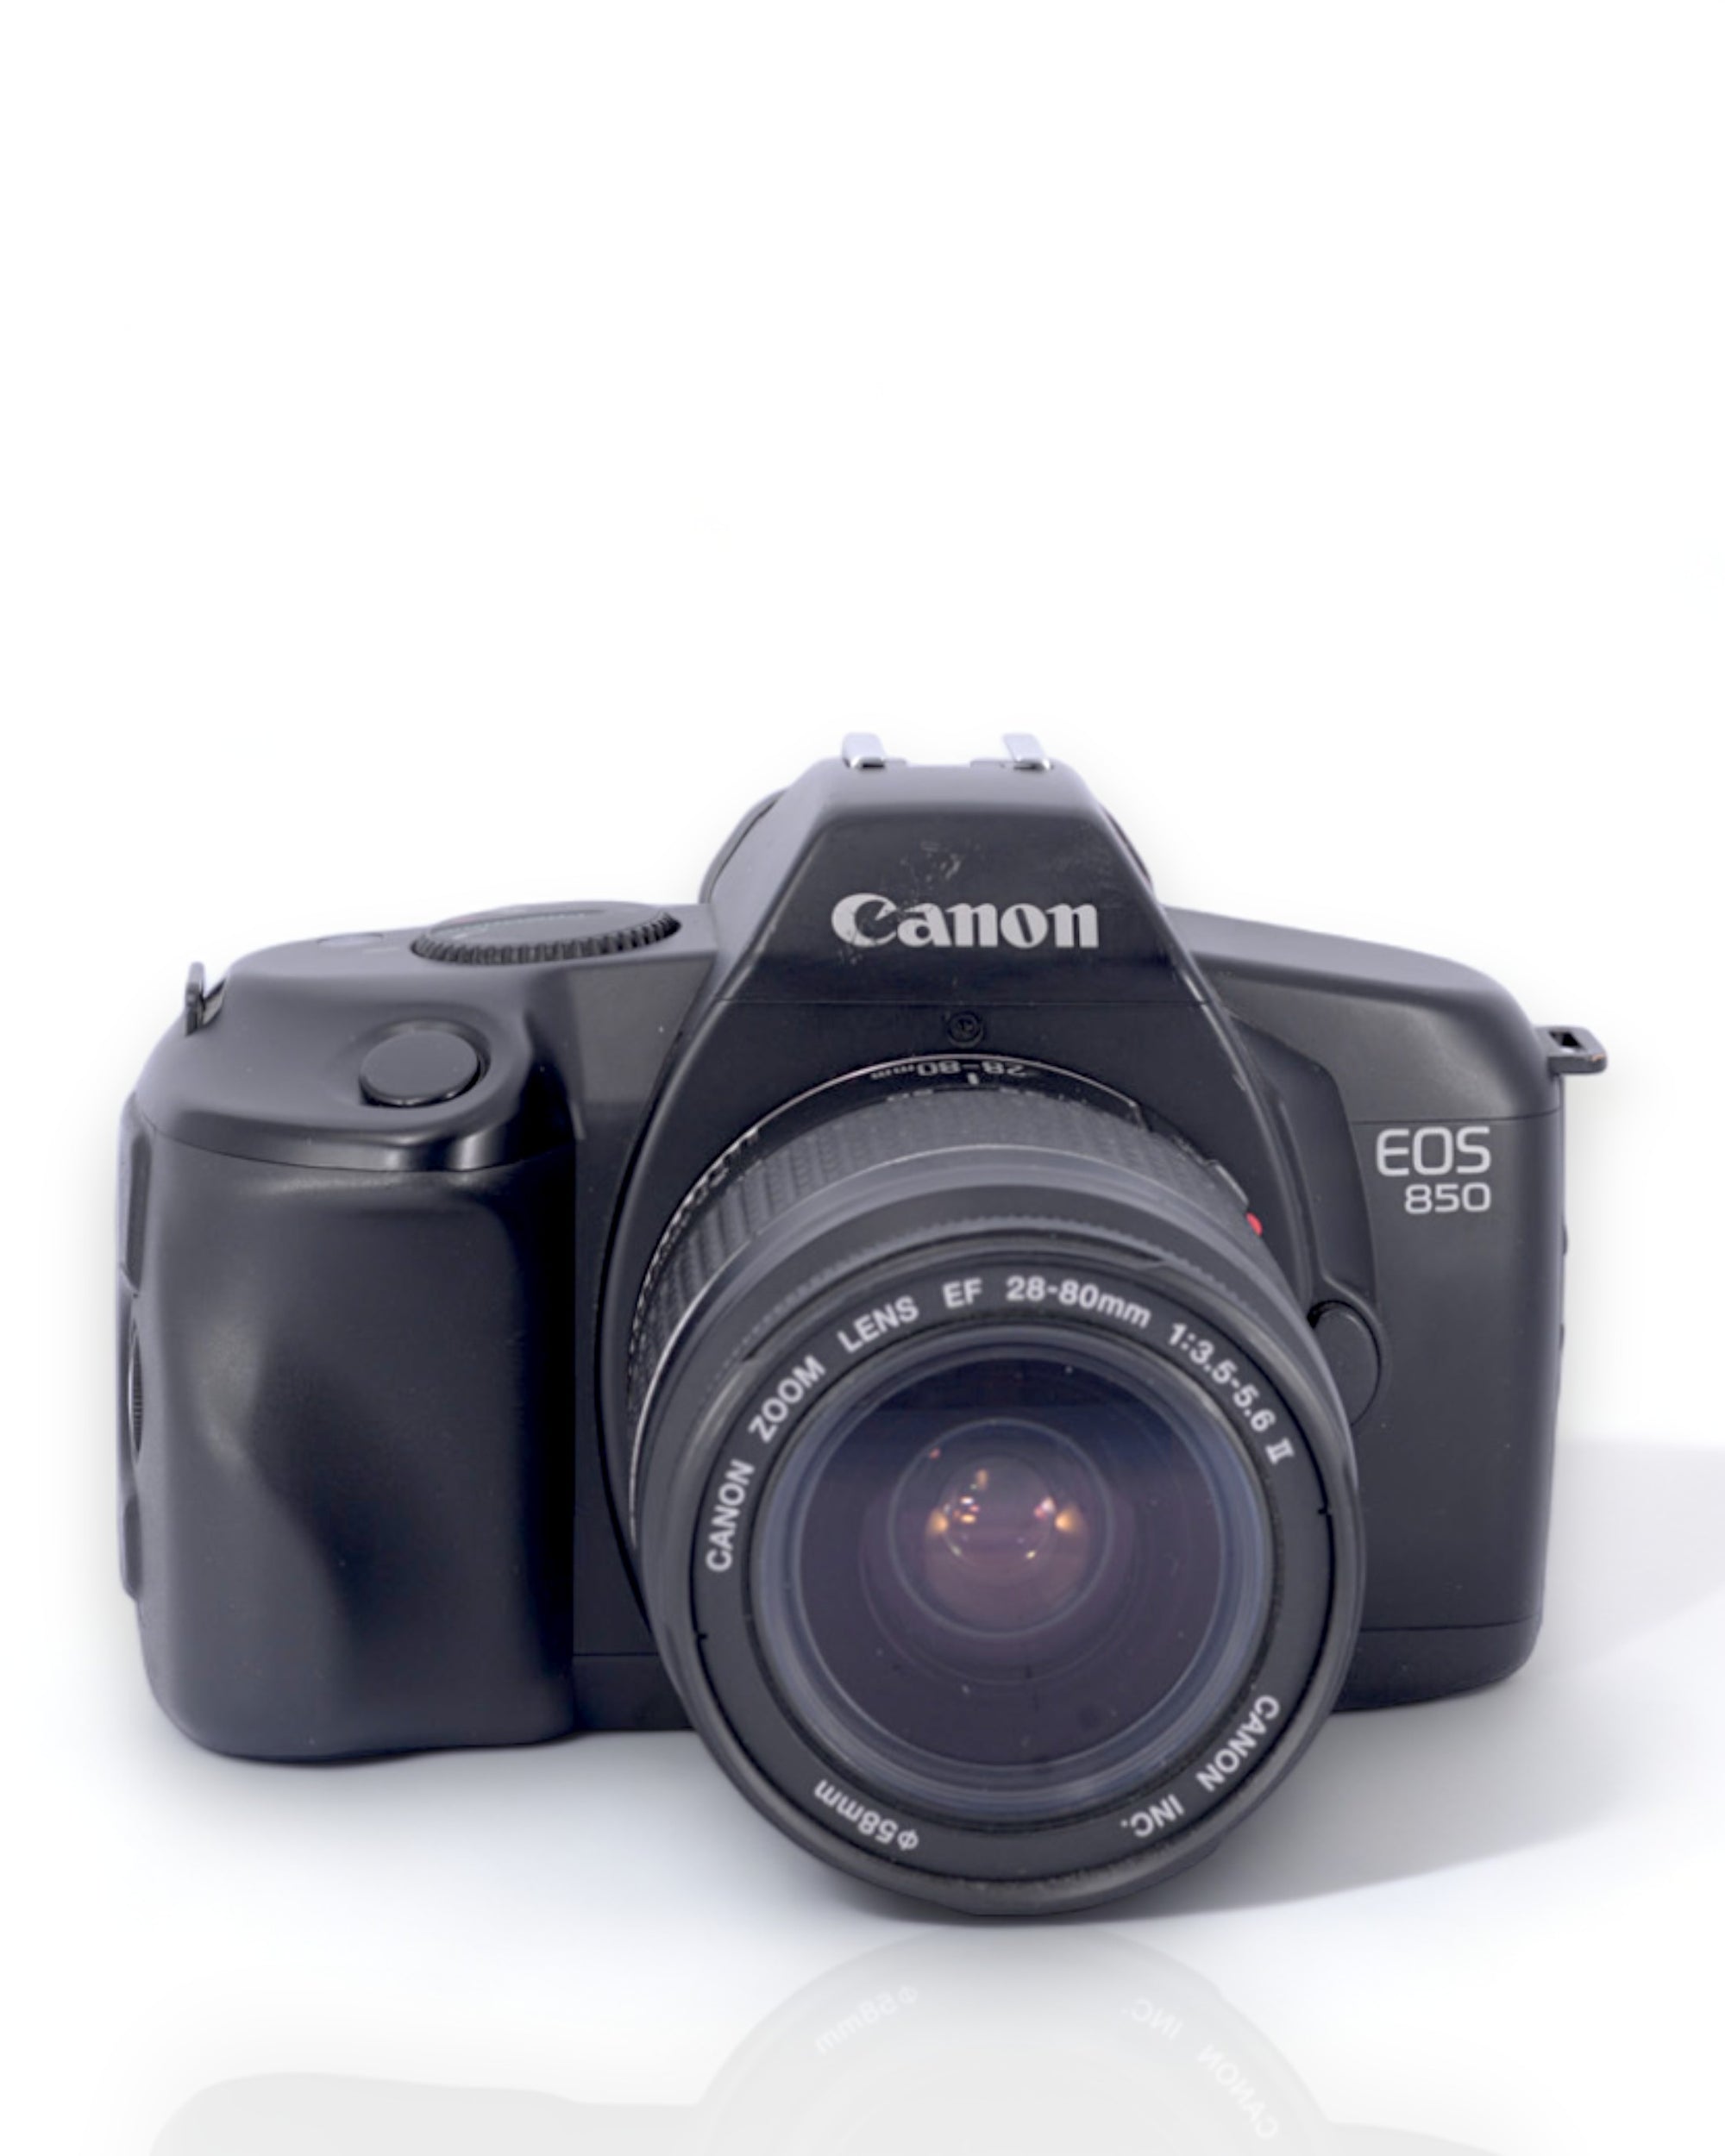 Canon EOS 850 35mm SLR Film Camera with 28-80mm Lens